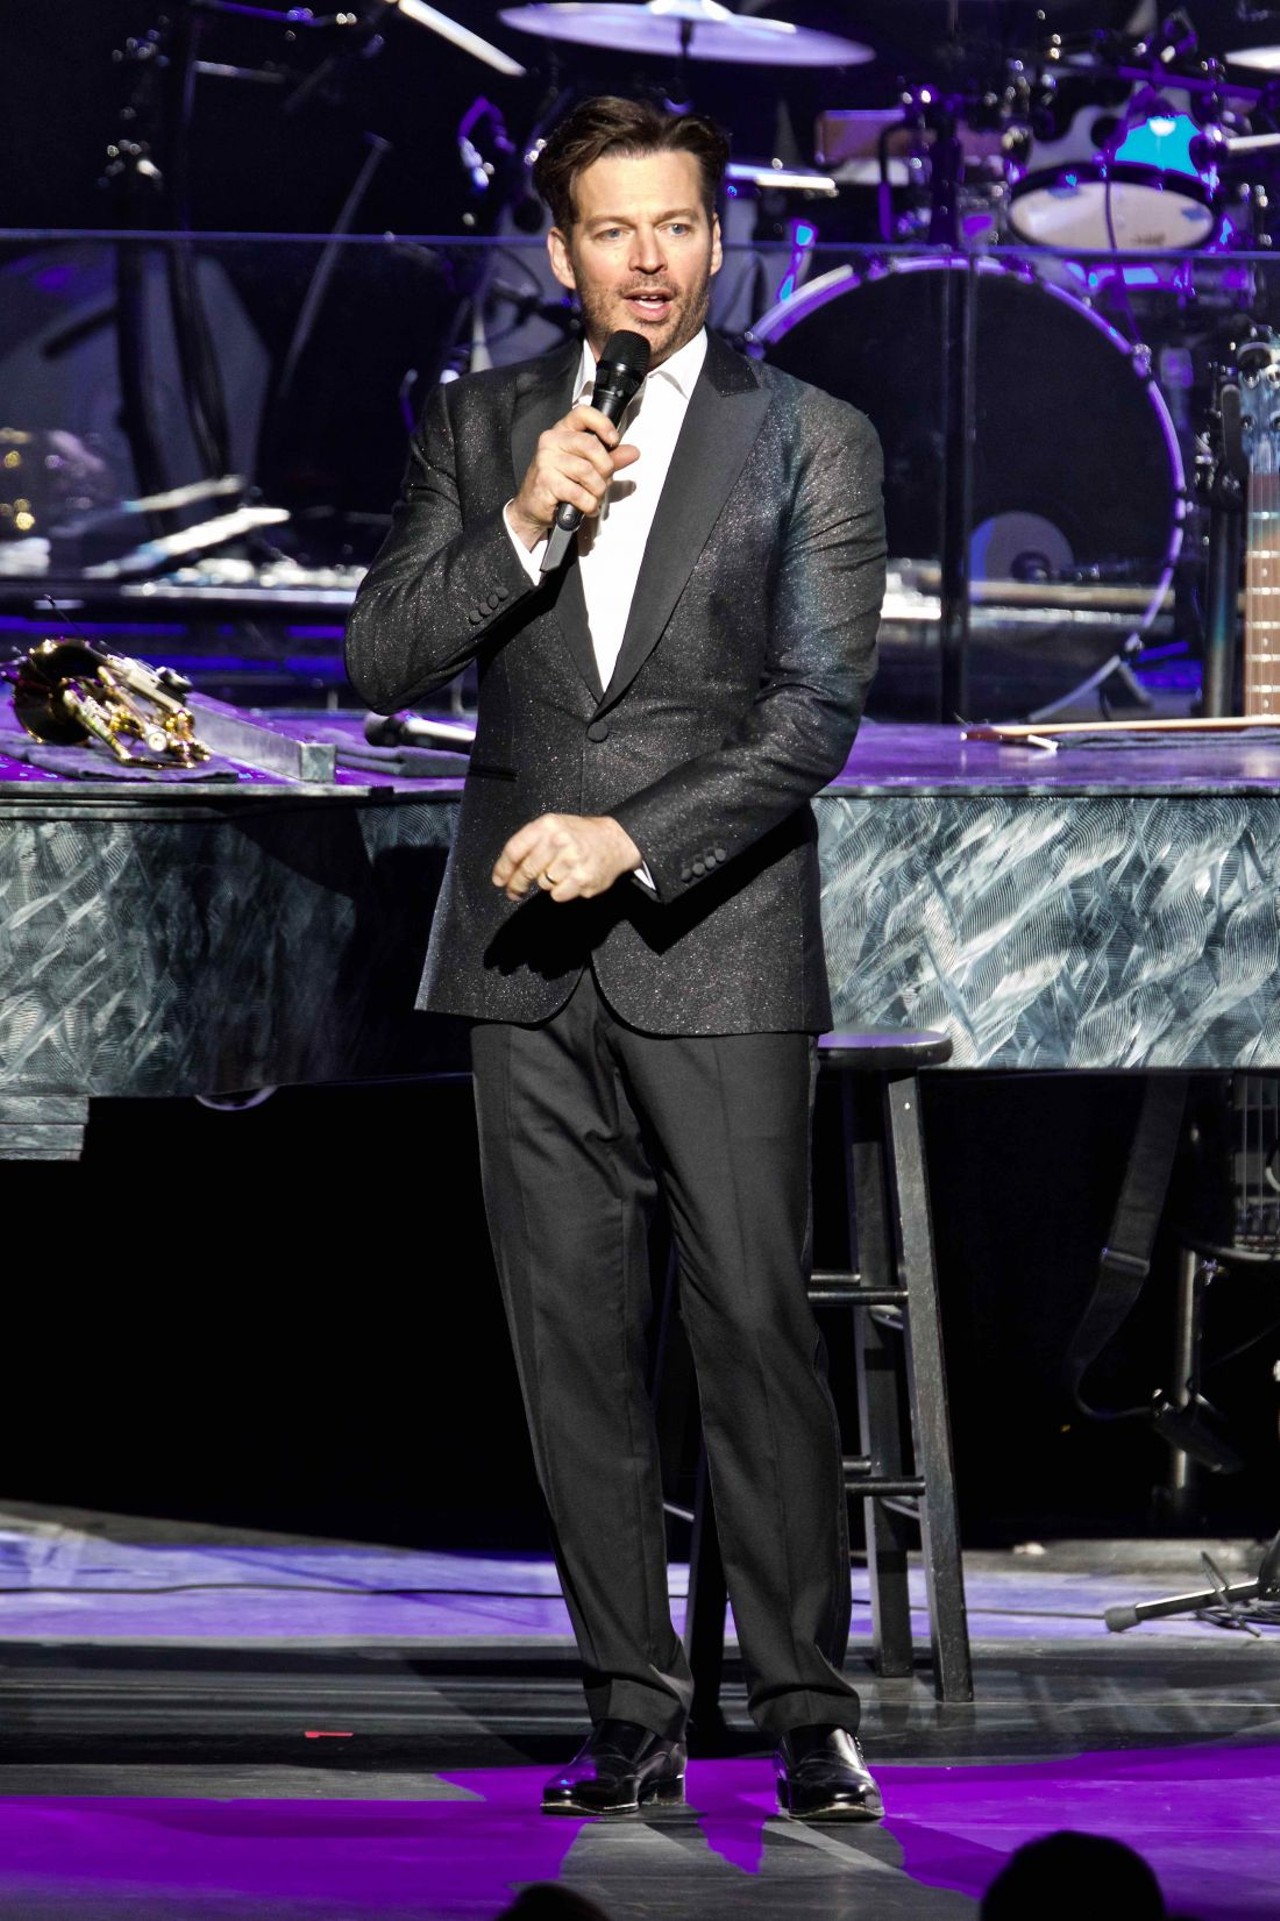 Harry Connick Jr. Performing at the State Theatre